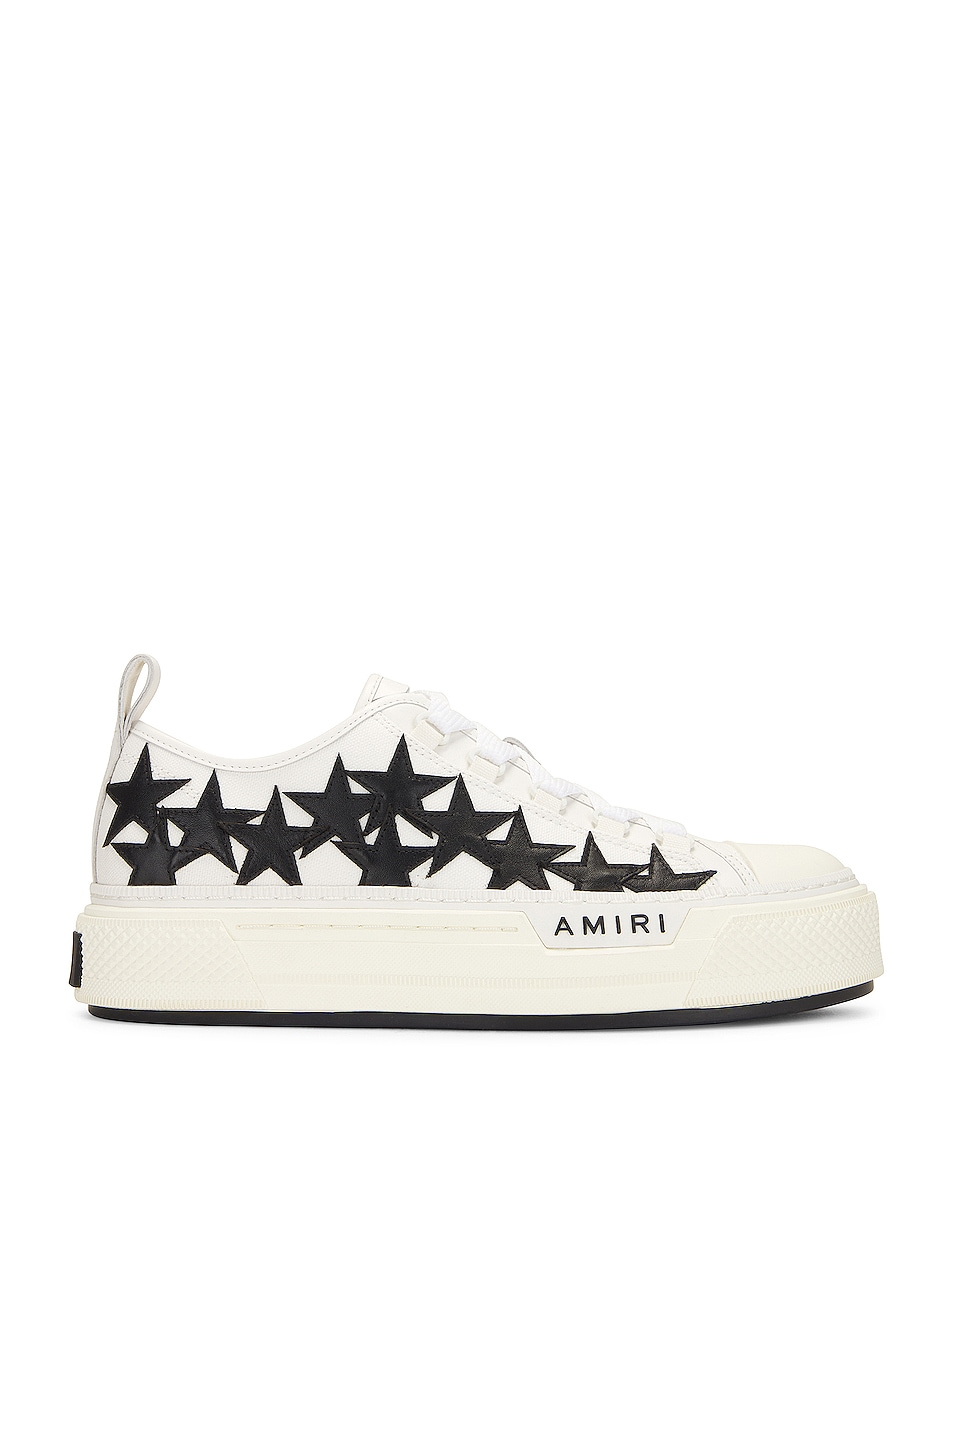 Image 1 of Amiri Stars Court Low Top Sneakers in White & Black